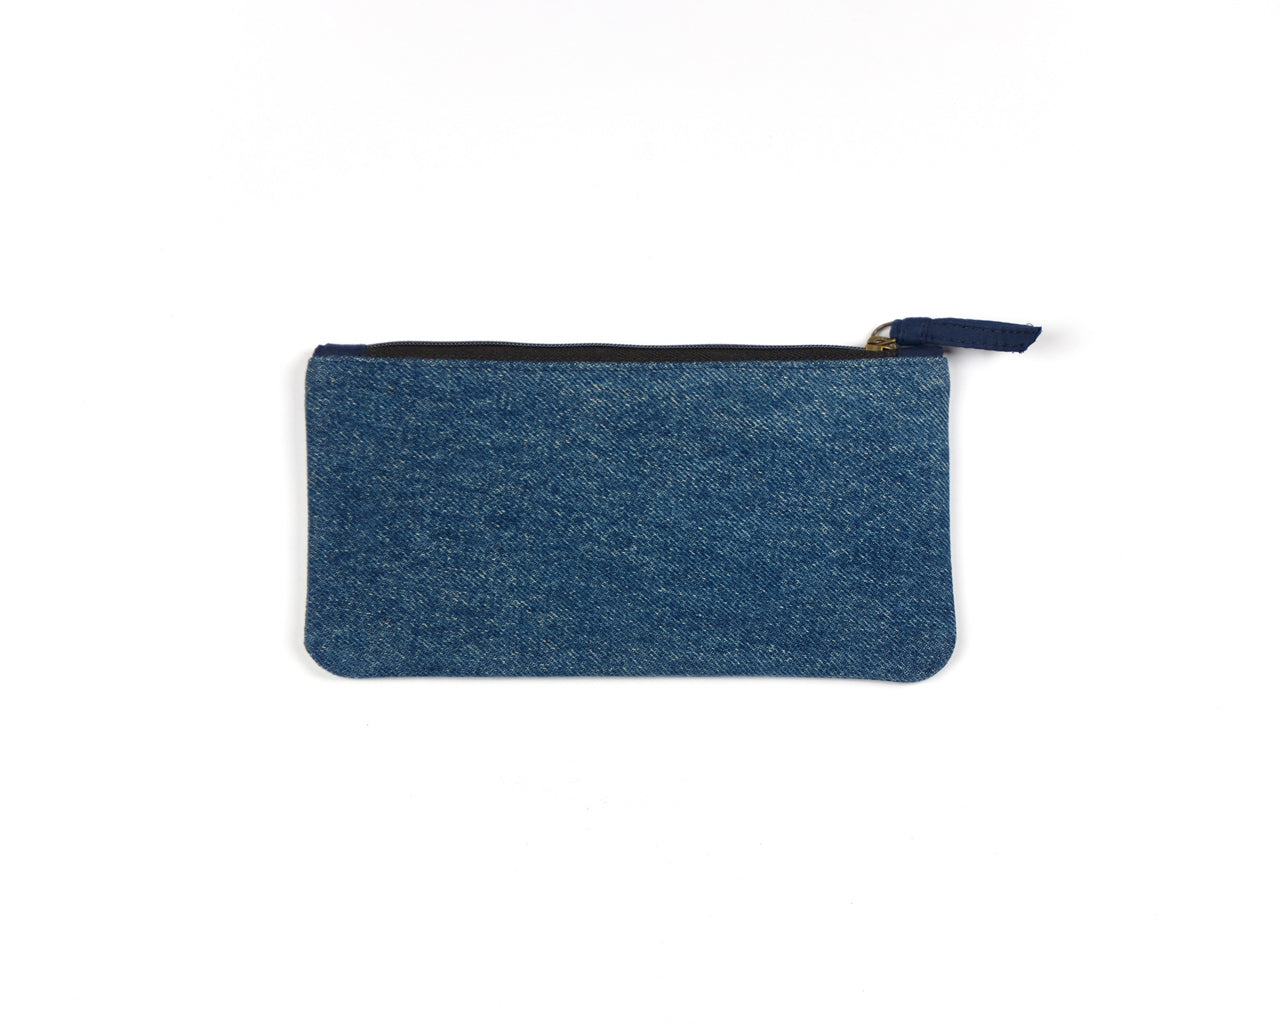 Quirky Pants Vanity Pouch